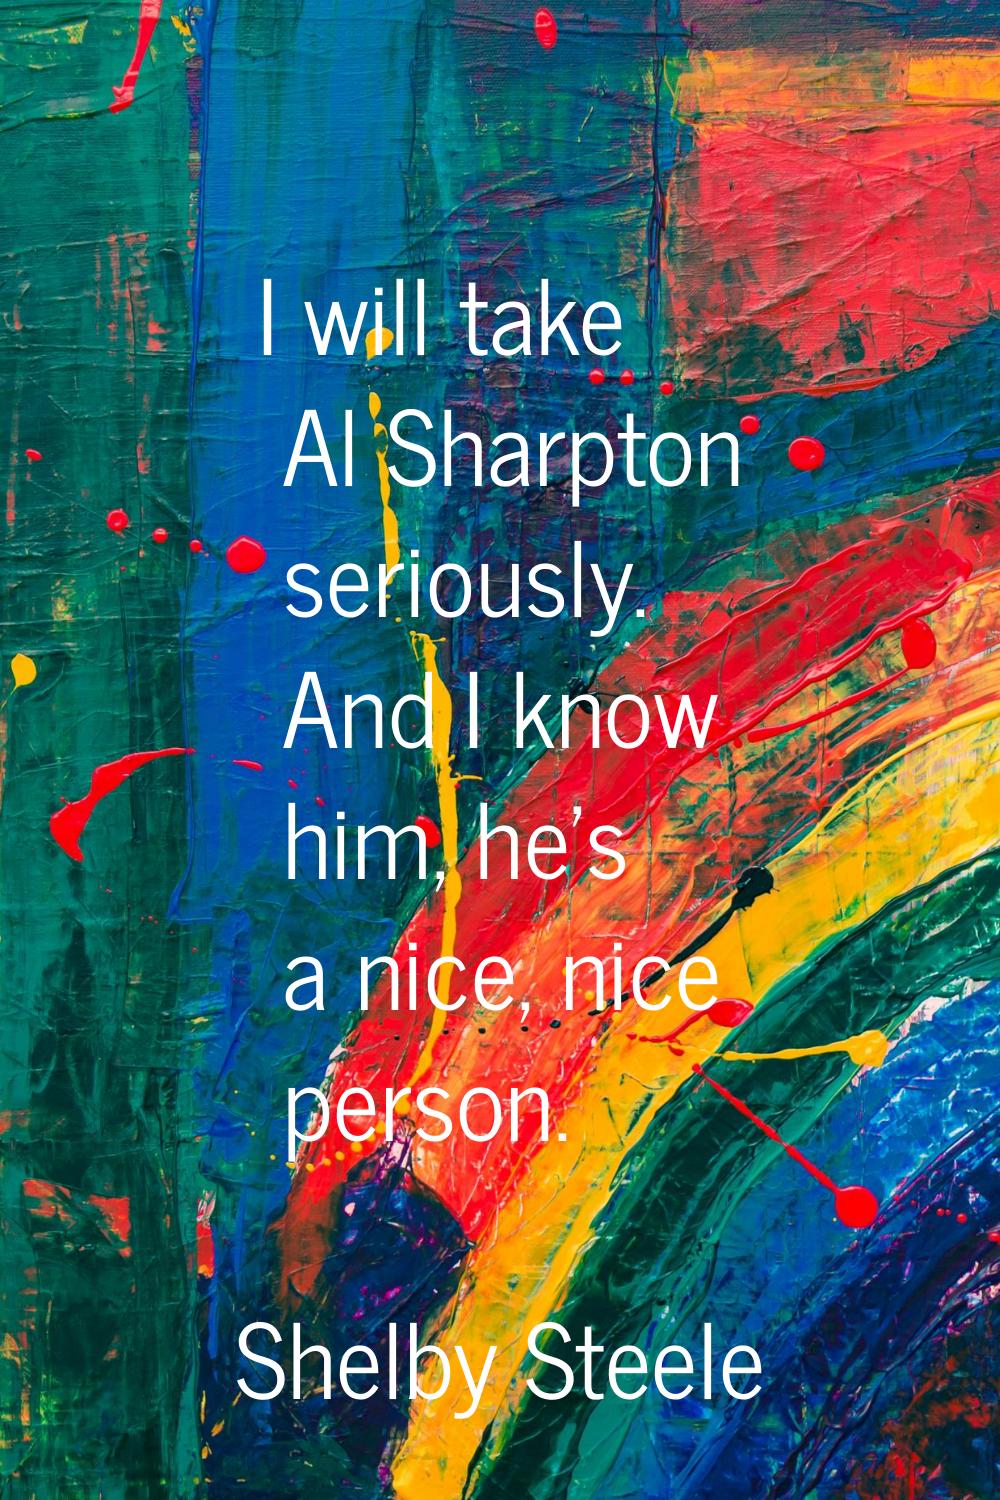 I will take Al Sharpton seriously. And I know him, he's a nice, nice person.